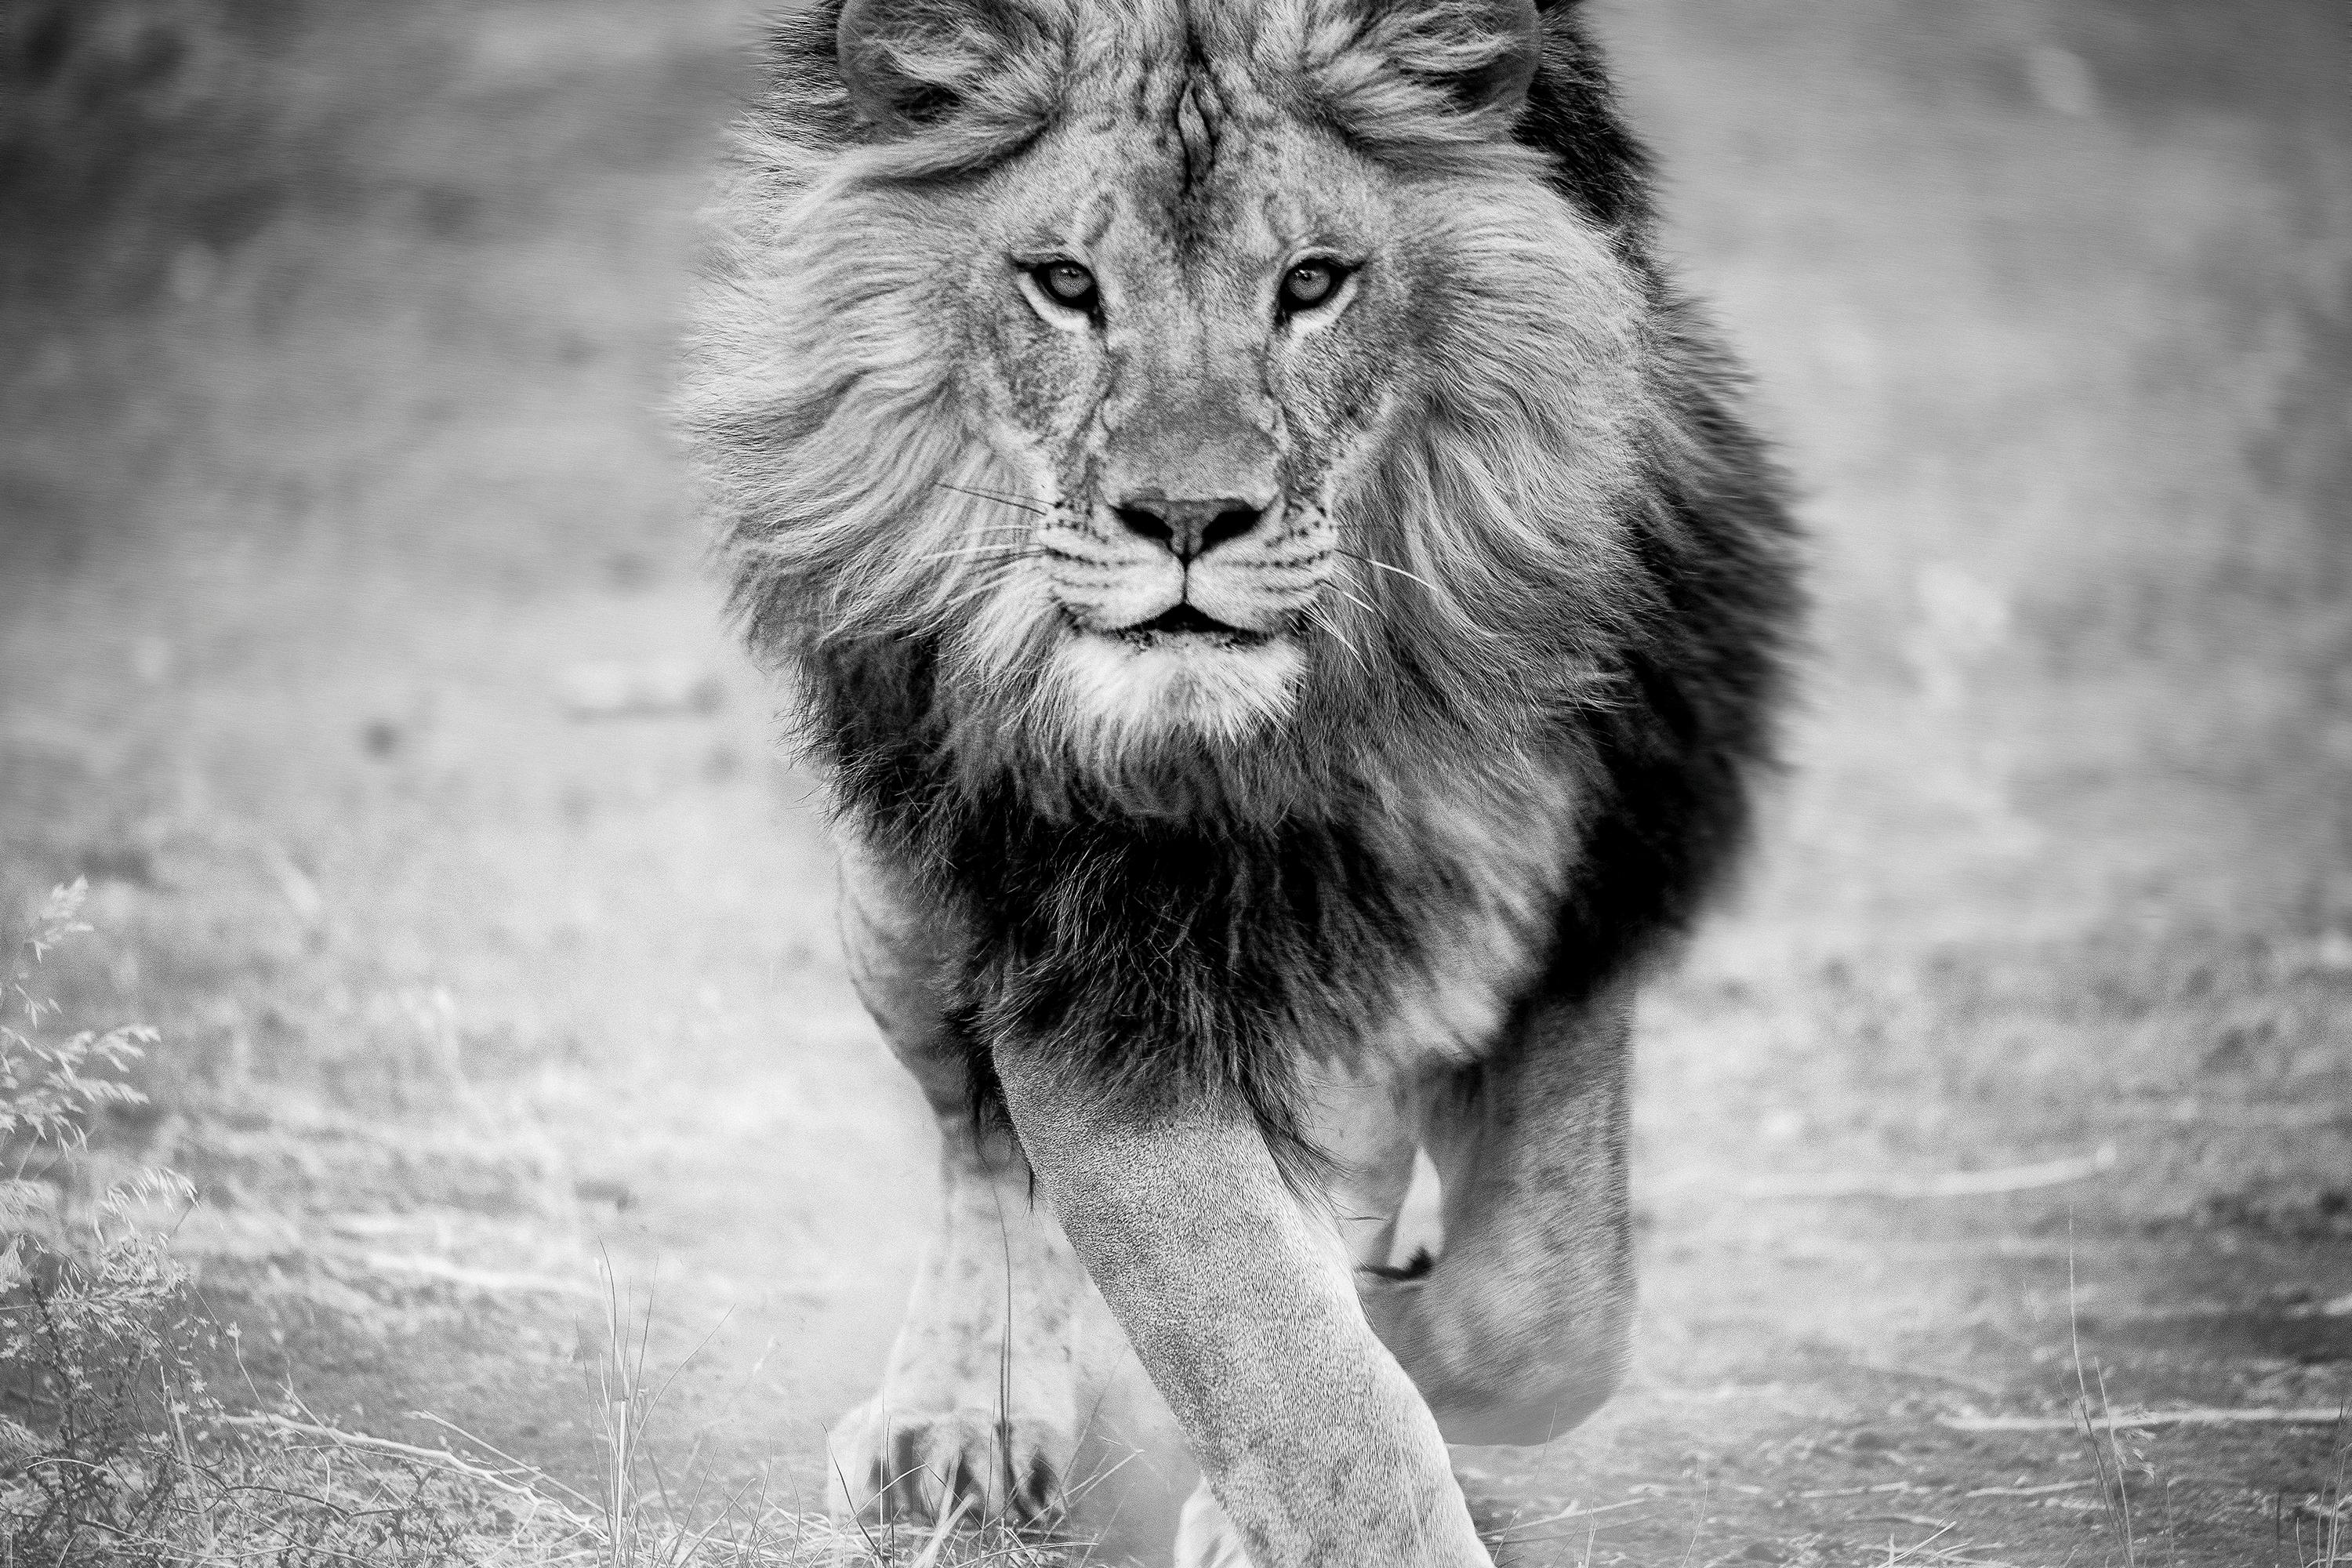 Shane Russeck Landscape Photograph - Panthera Leo -20 x 30 Contemporary Black and White Photography, Lion 